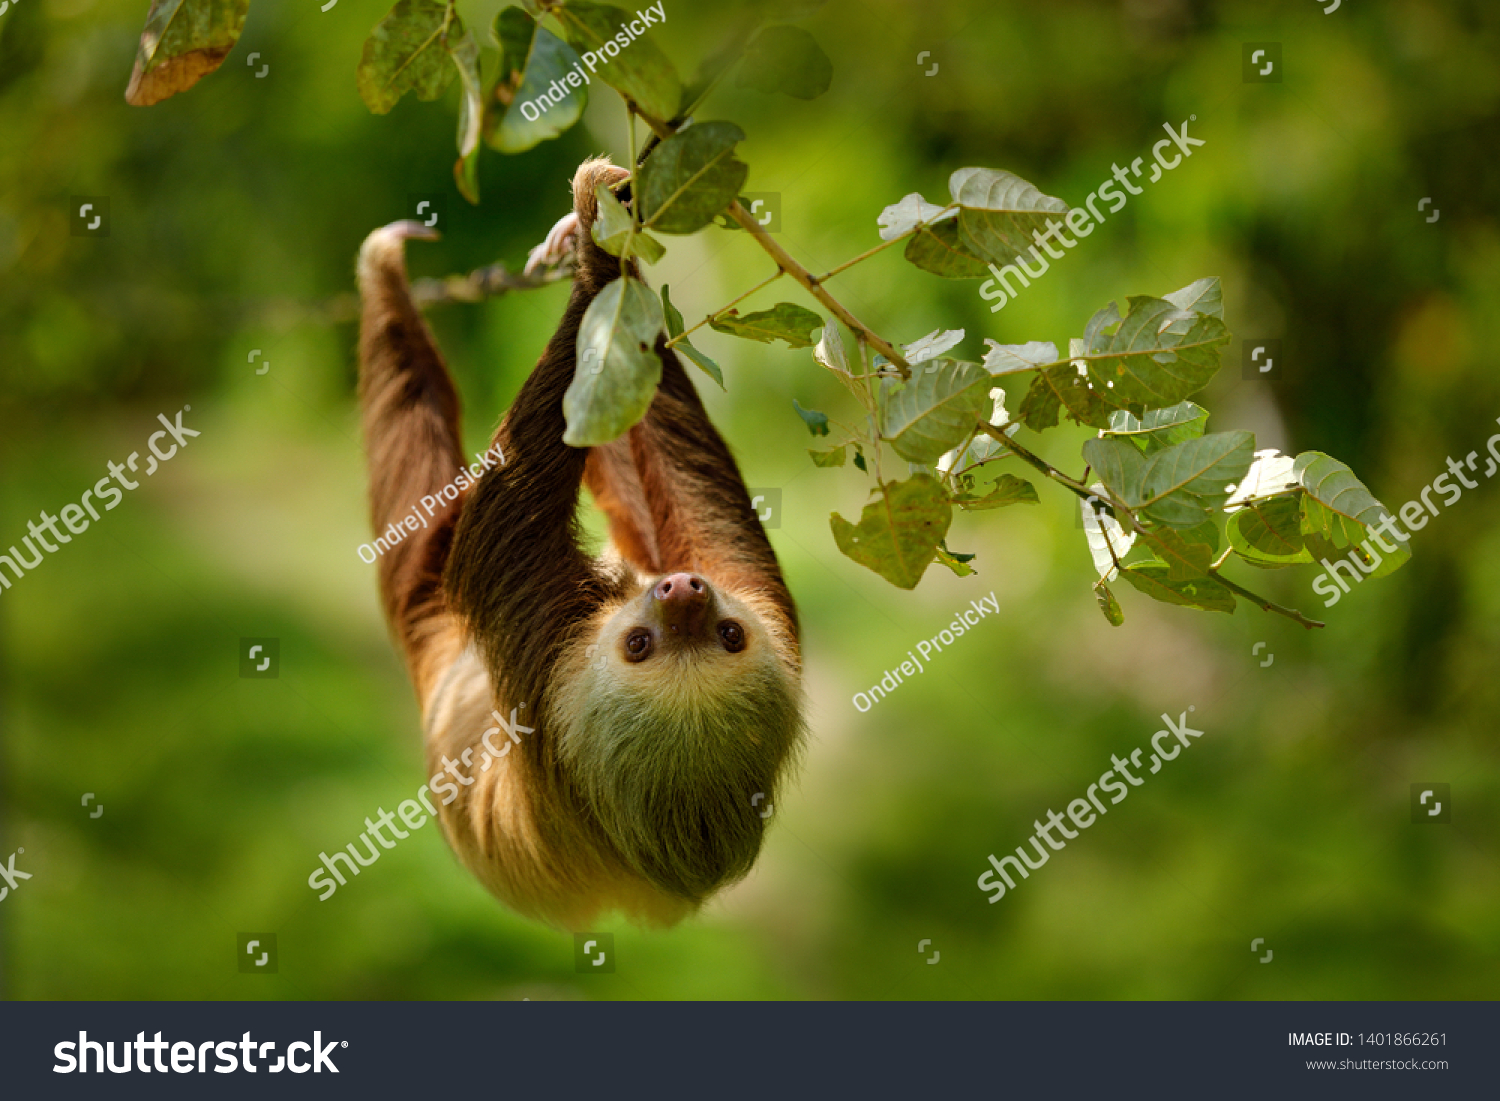 Sloth in nature habitat. Beautiful Hoffman’s Two-toed Sloth, Choloepus hoffmanni, climbing on the tree in dark green forest vegetation. Cute animal in the habitat, Costa Rica. Wildlife in jungle. #1401866261